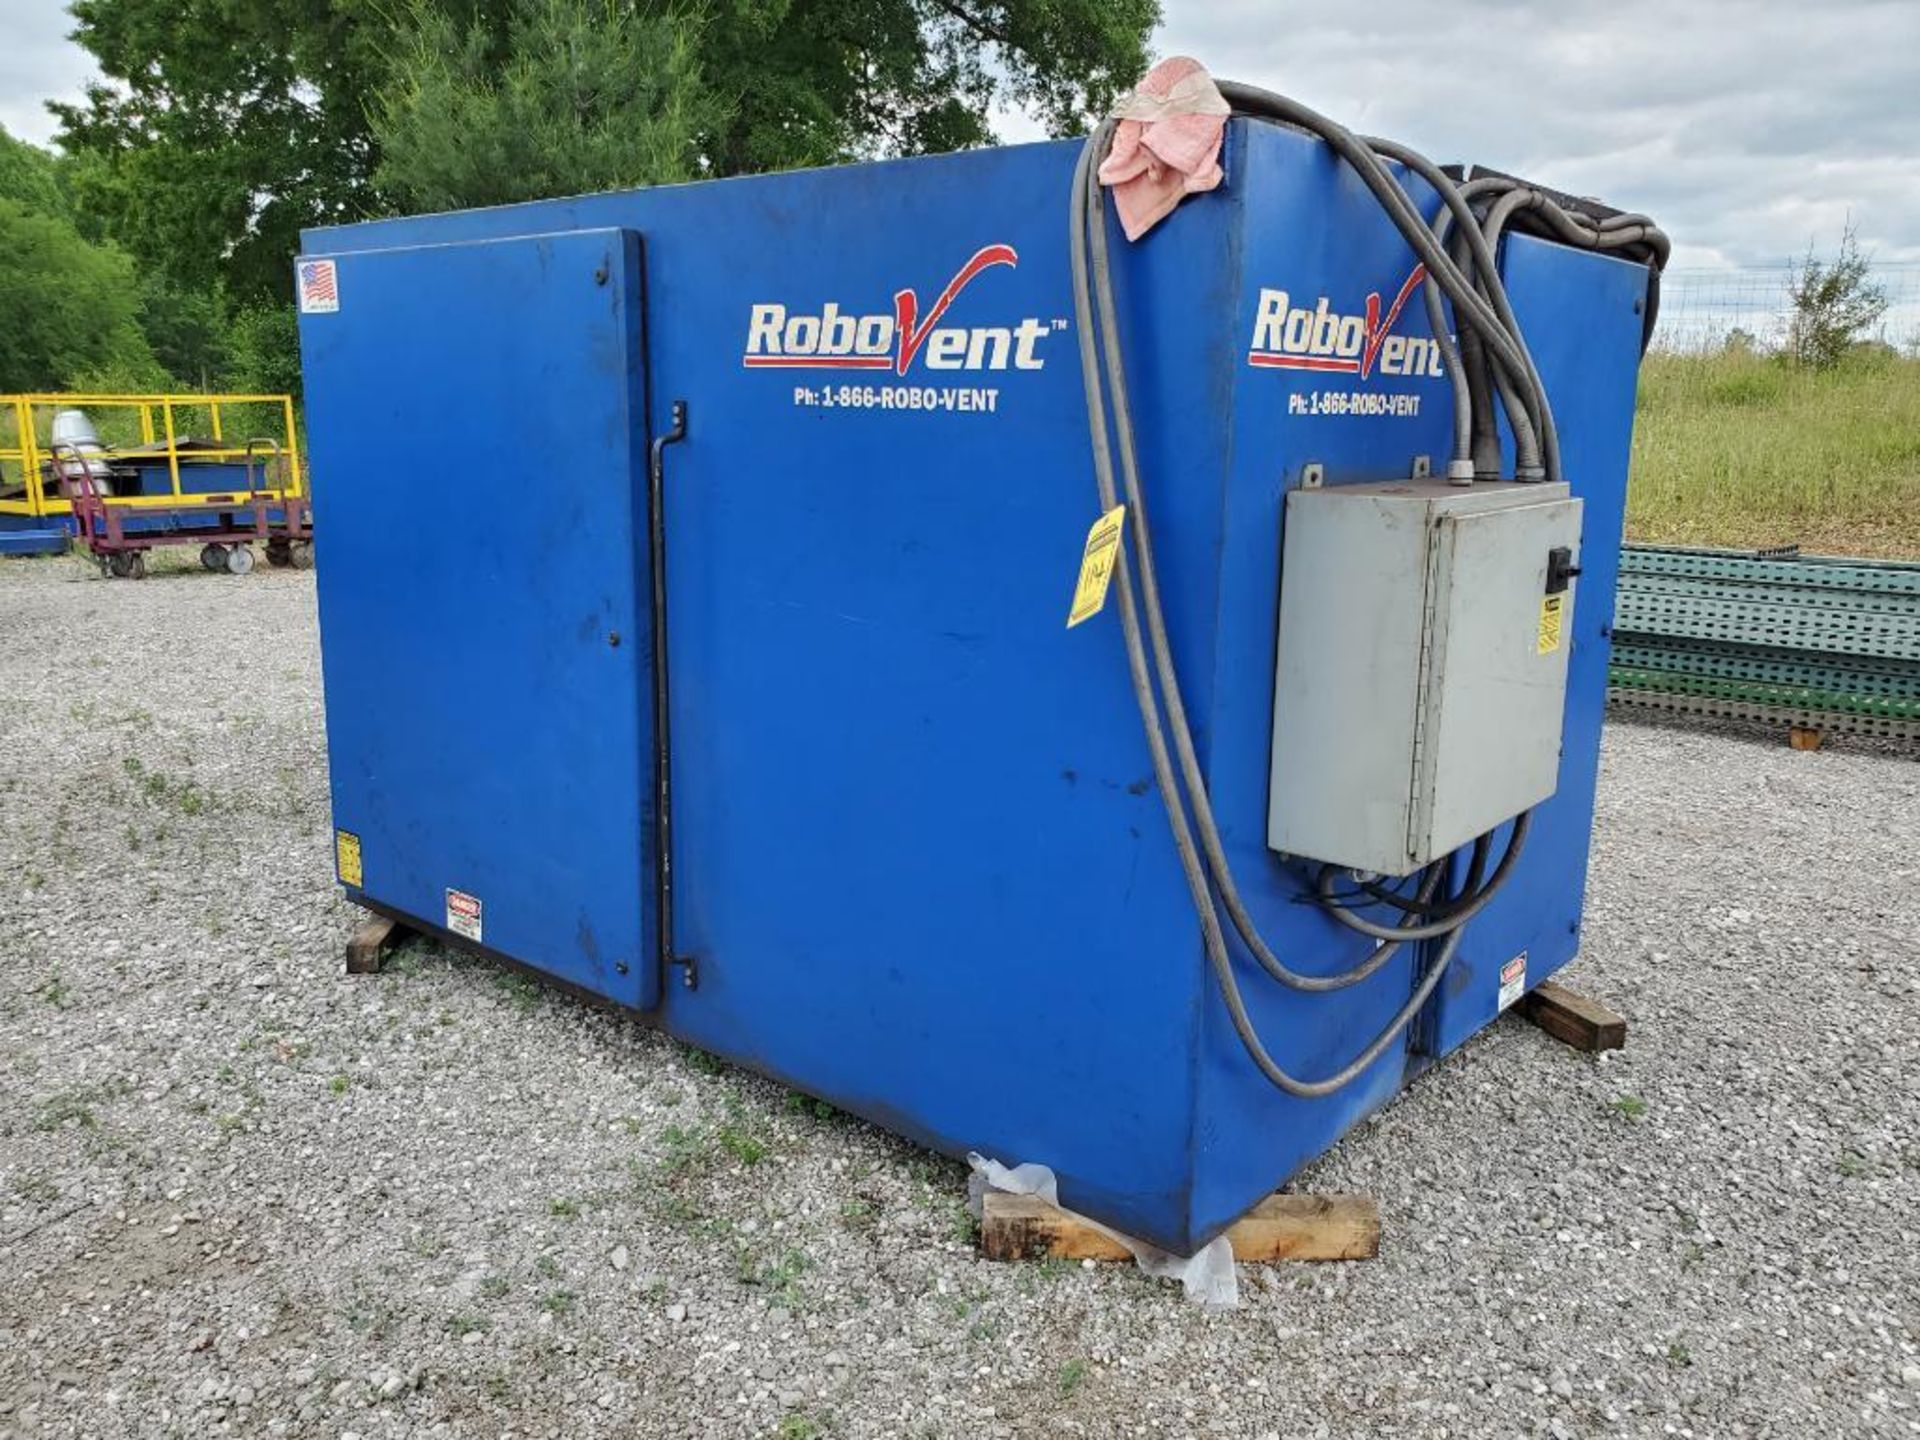 Great Lakes Air Robovent Dust Collector, Model DFS-8000-8, S/N 19760, 15 HP, 3 PH, 21 AMP, 460V - Image 2 of 7